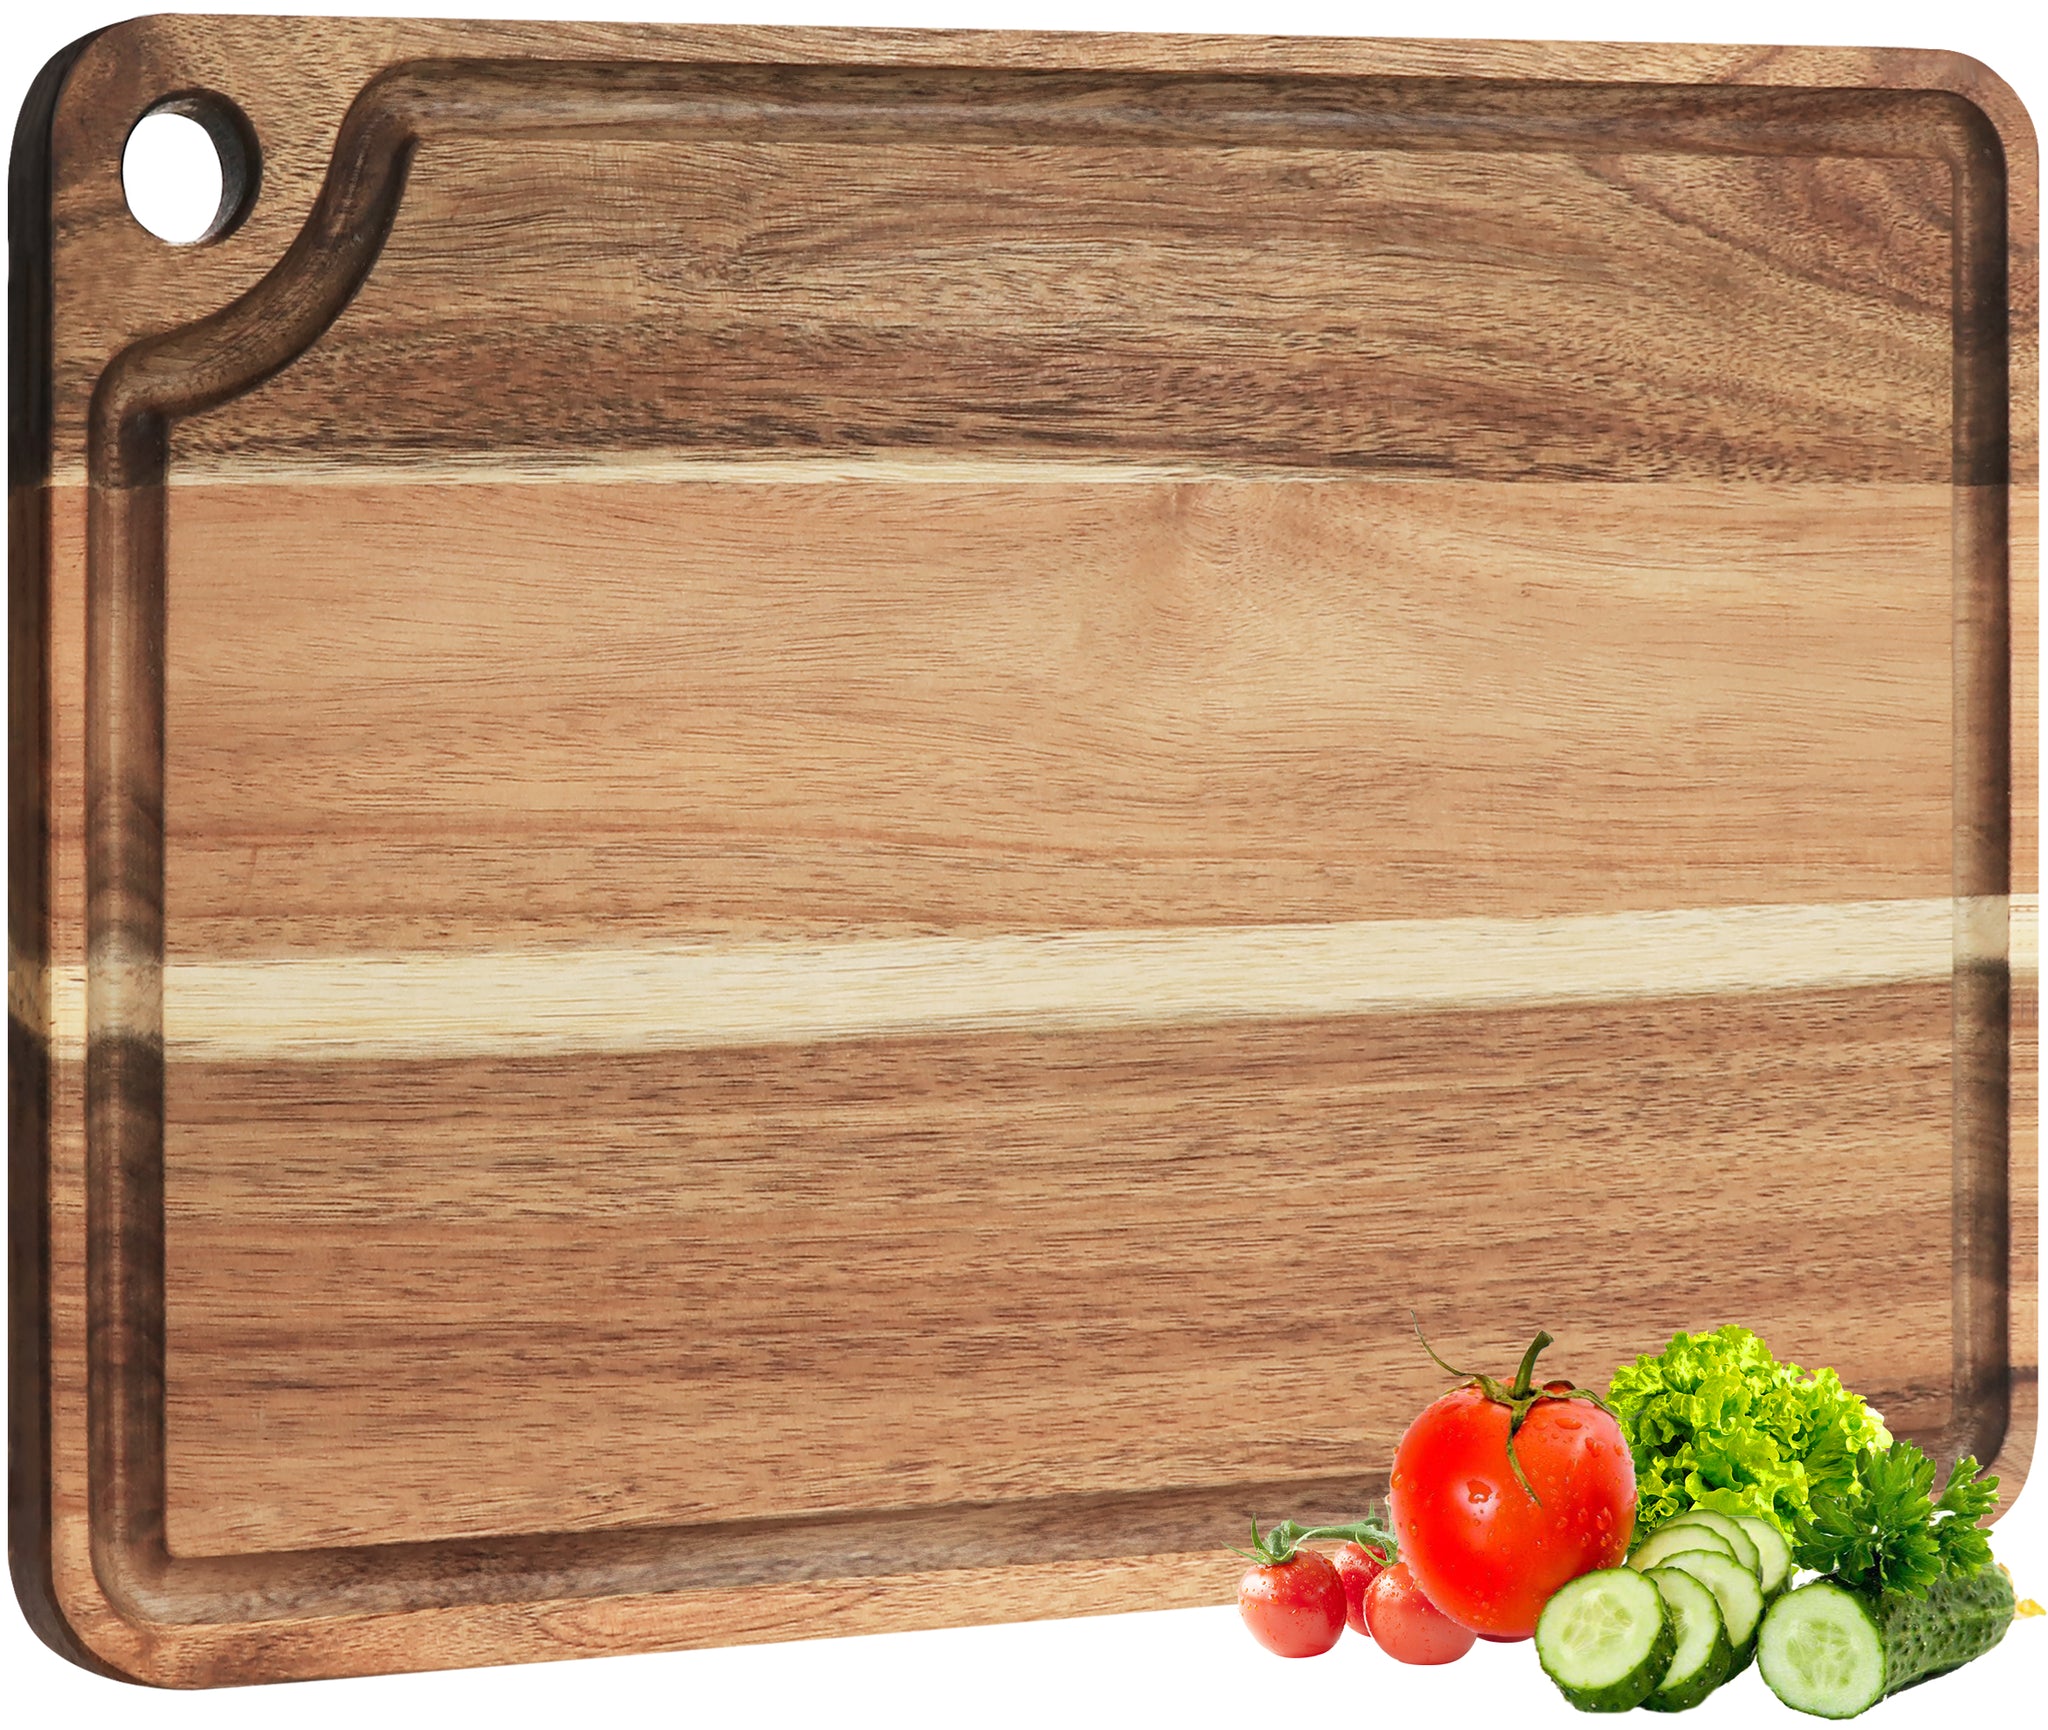 Cutting Board for Kitchen, Extra Large Thick Mosaic Acacia Wood Chopping  Board 18x24x1.5 inch, Butcher Block Cutting Board, Housewarming Gifts for  New